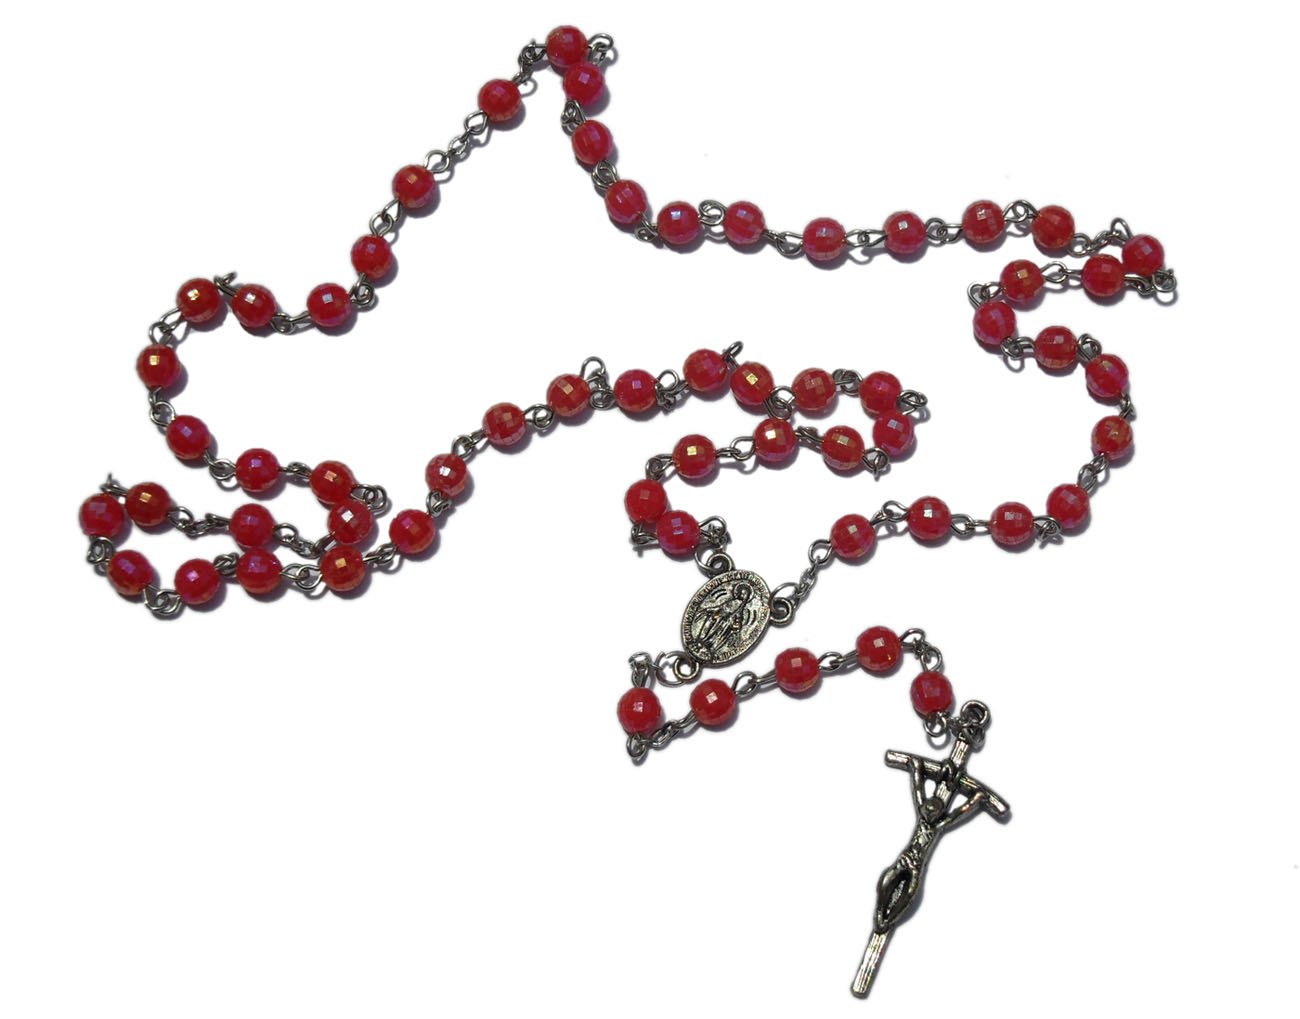 rosary clipart free download - photo #16